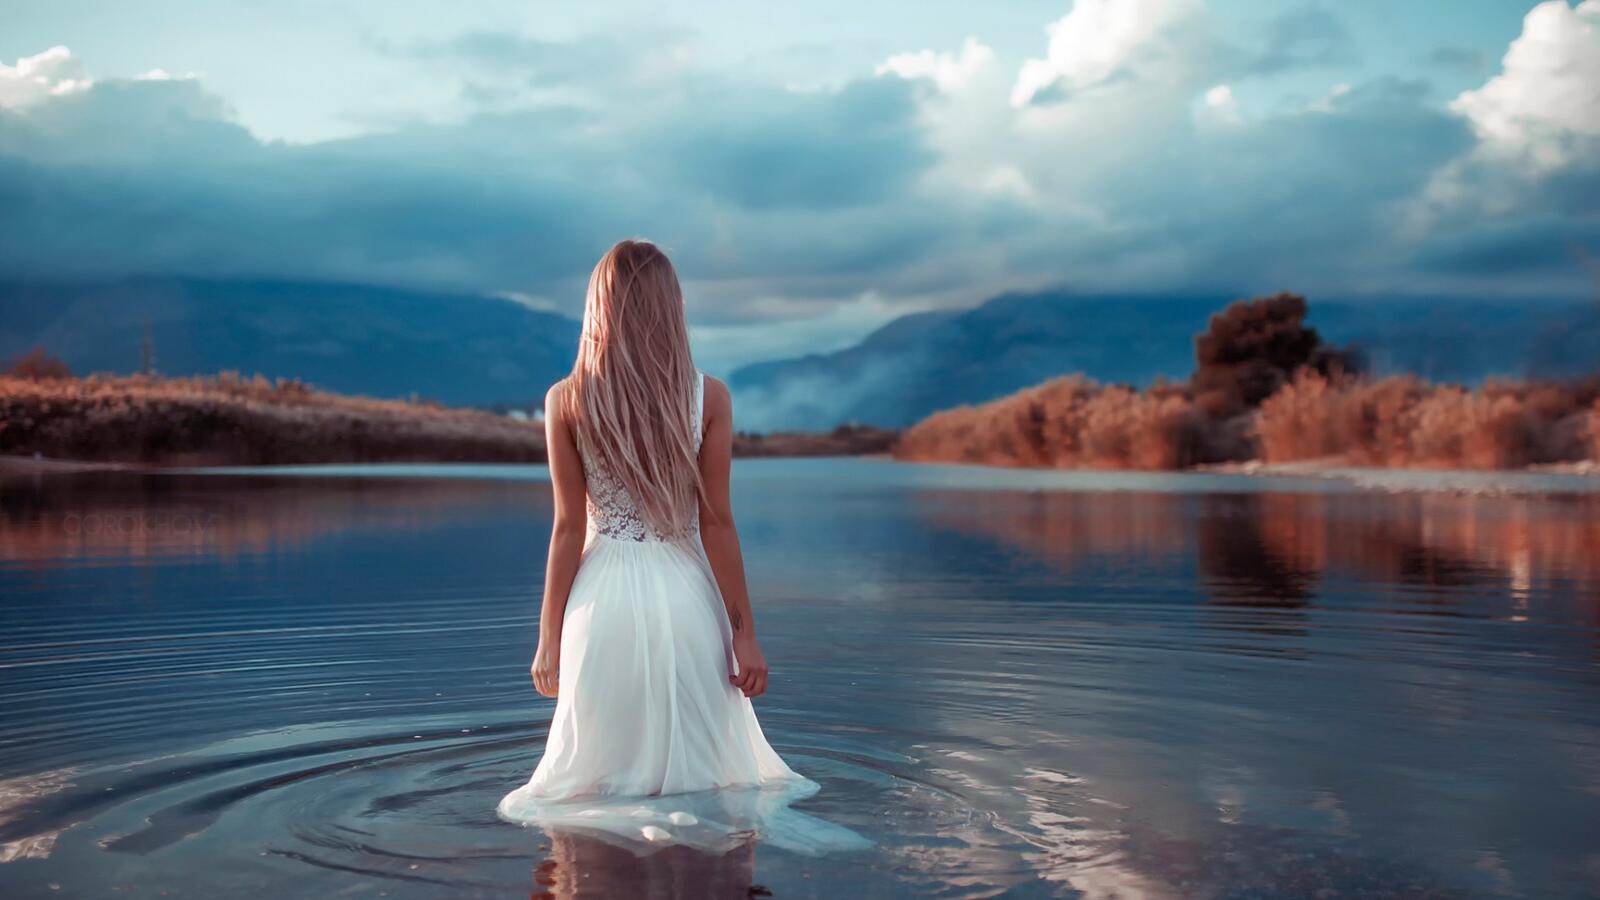 Free photo A girl in a light white dress walks into the water